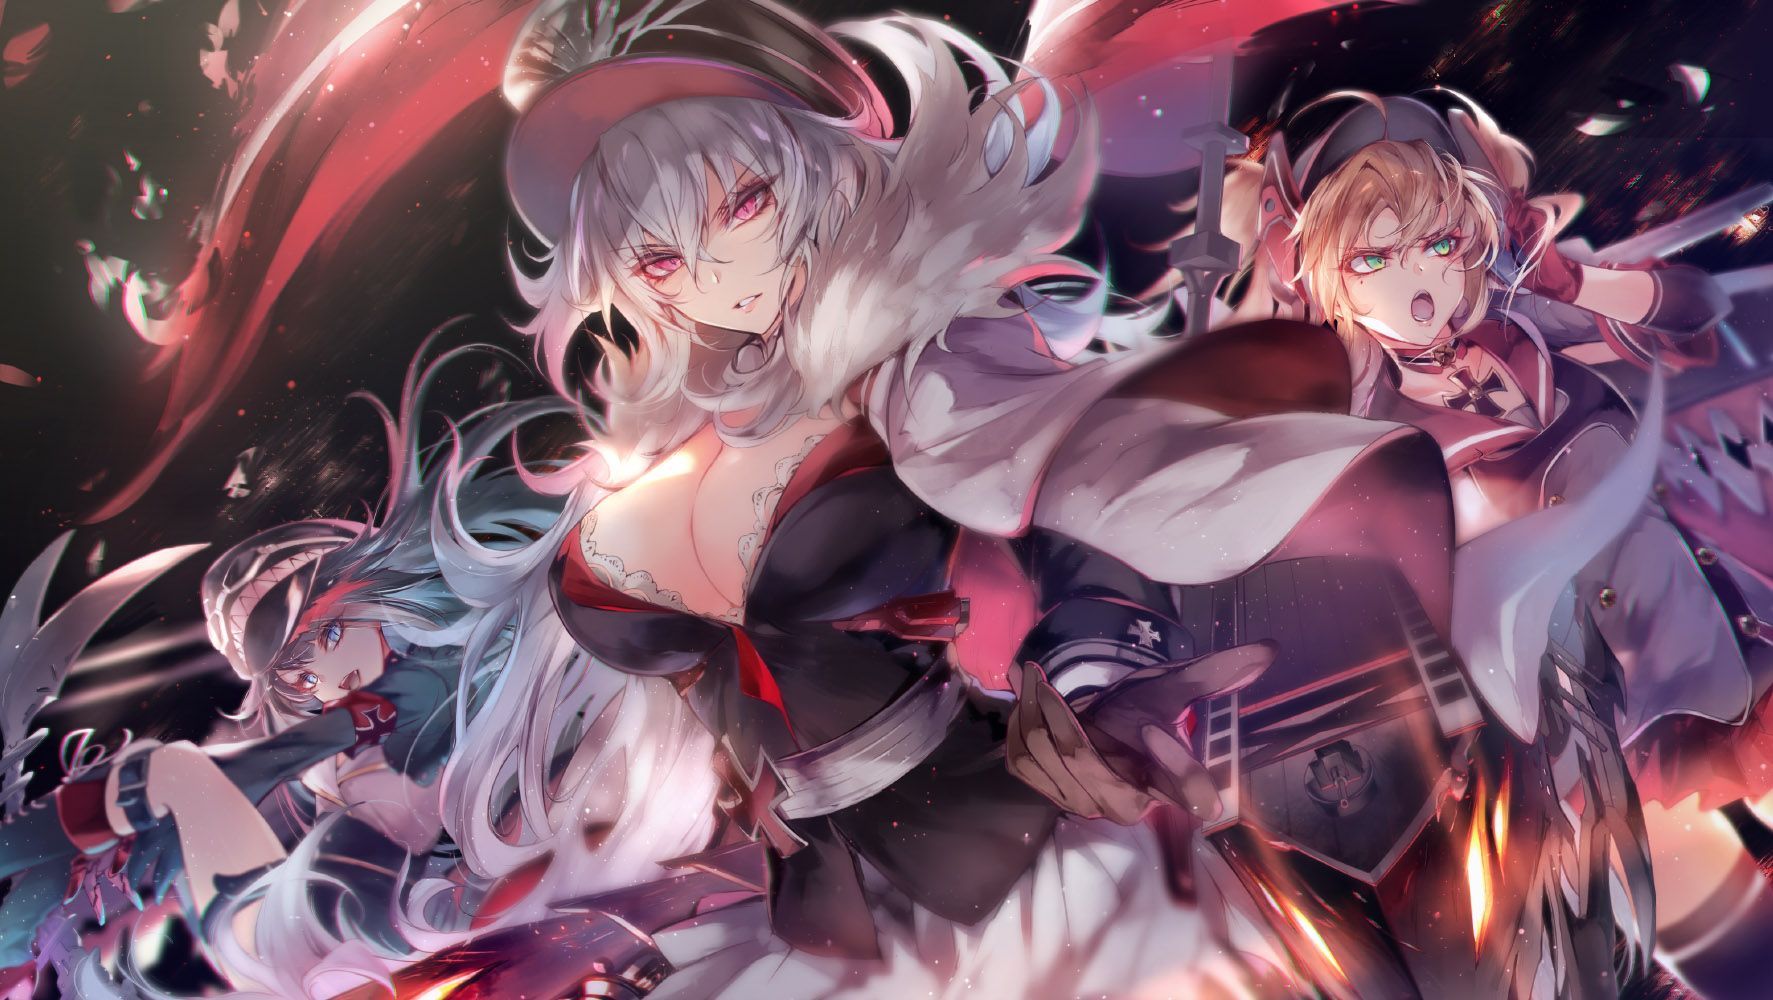 Cute two-dimensional image of Azur Lane. 6